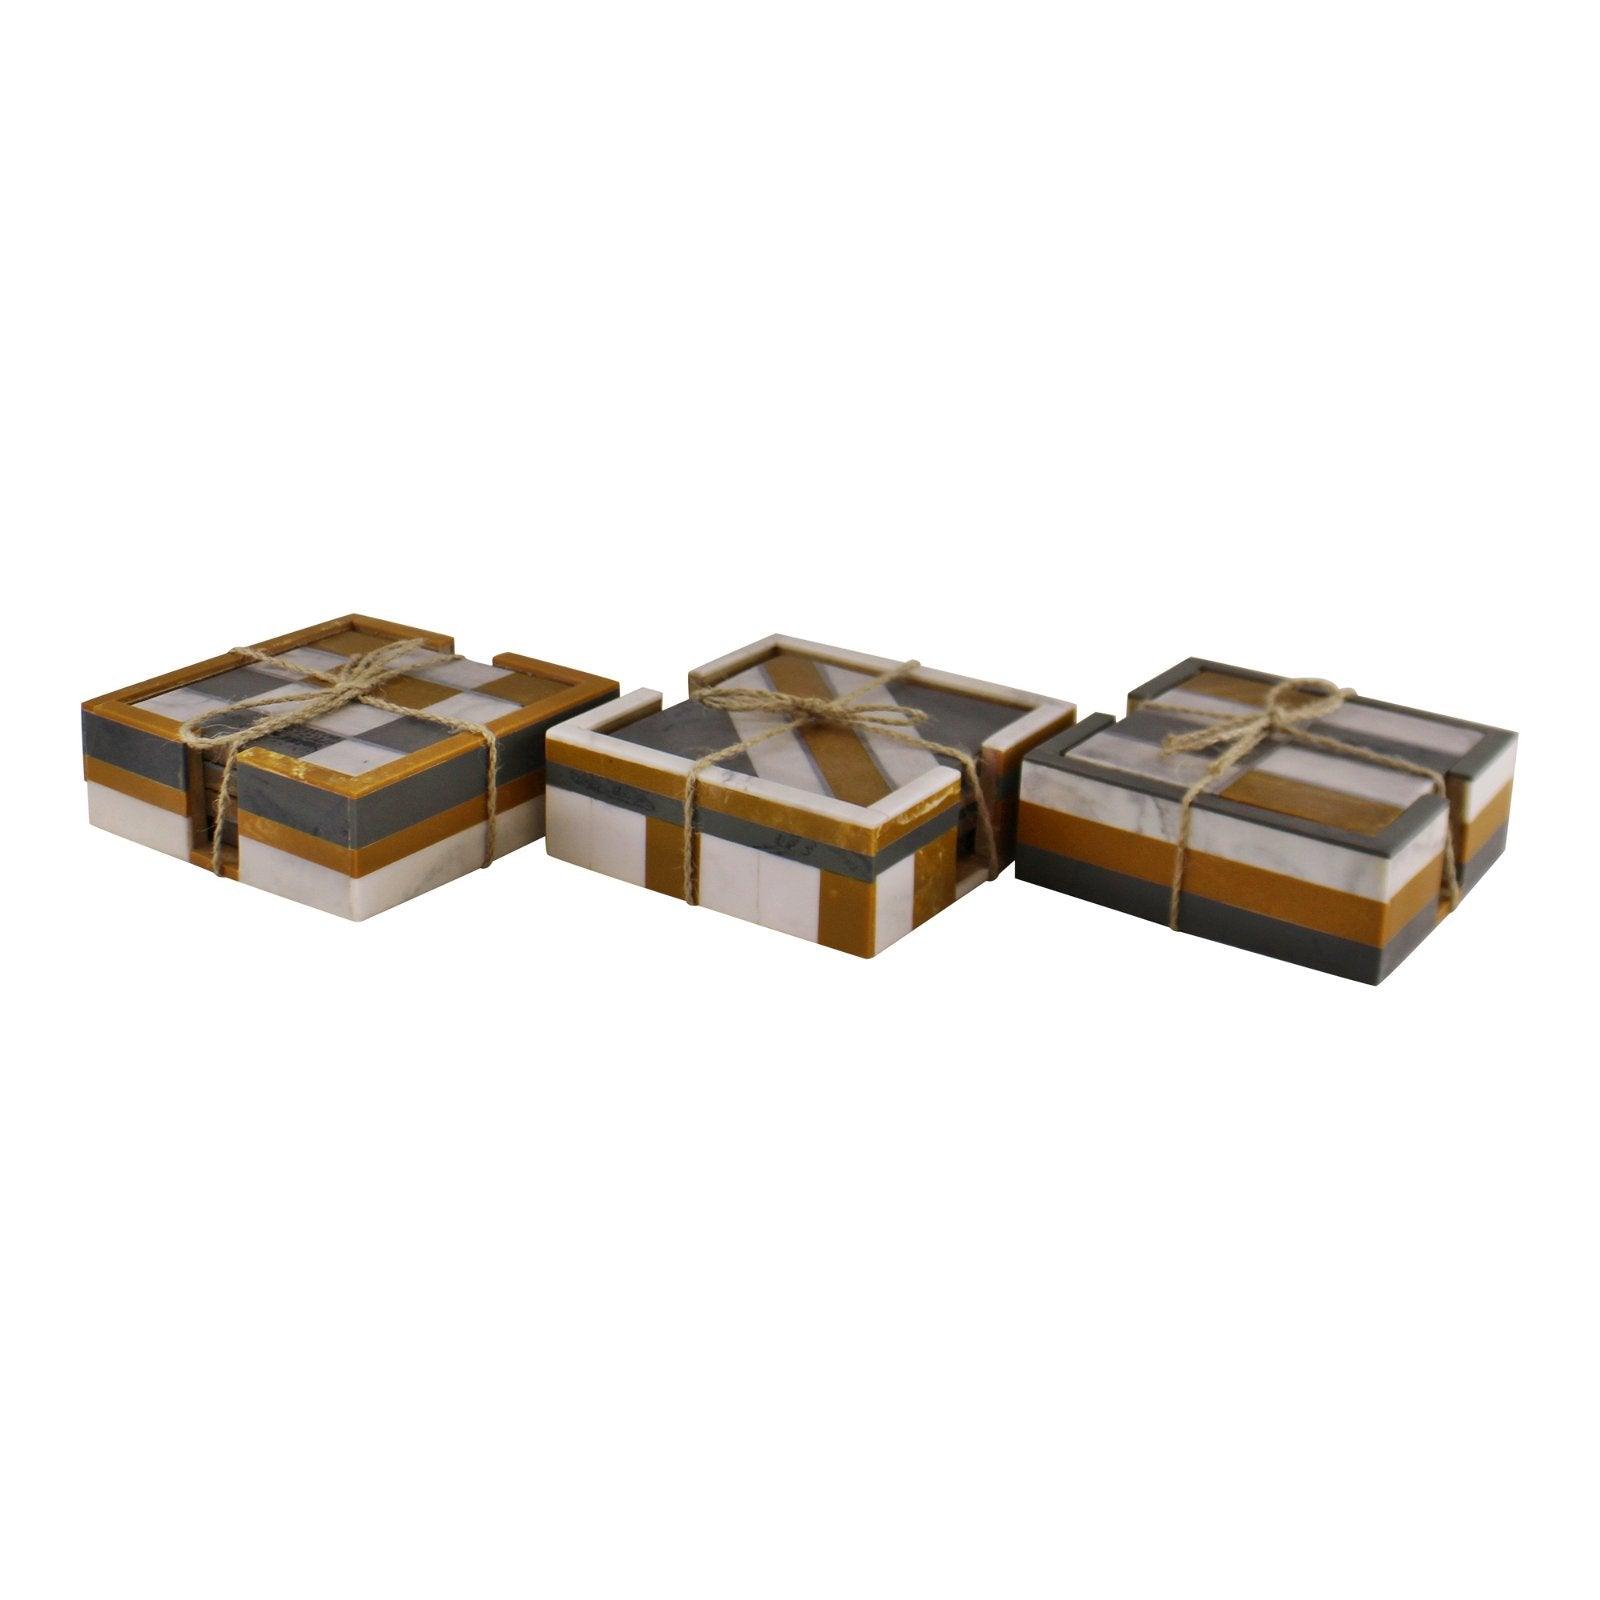 View Set of 4 Square Resin Coasters Abstract Design information